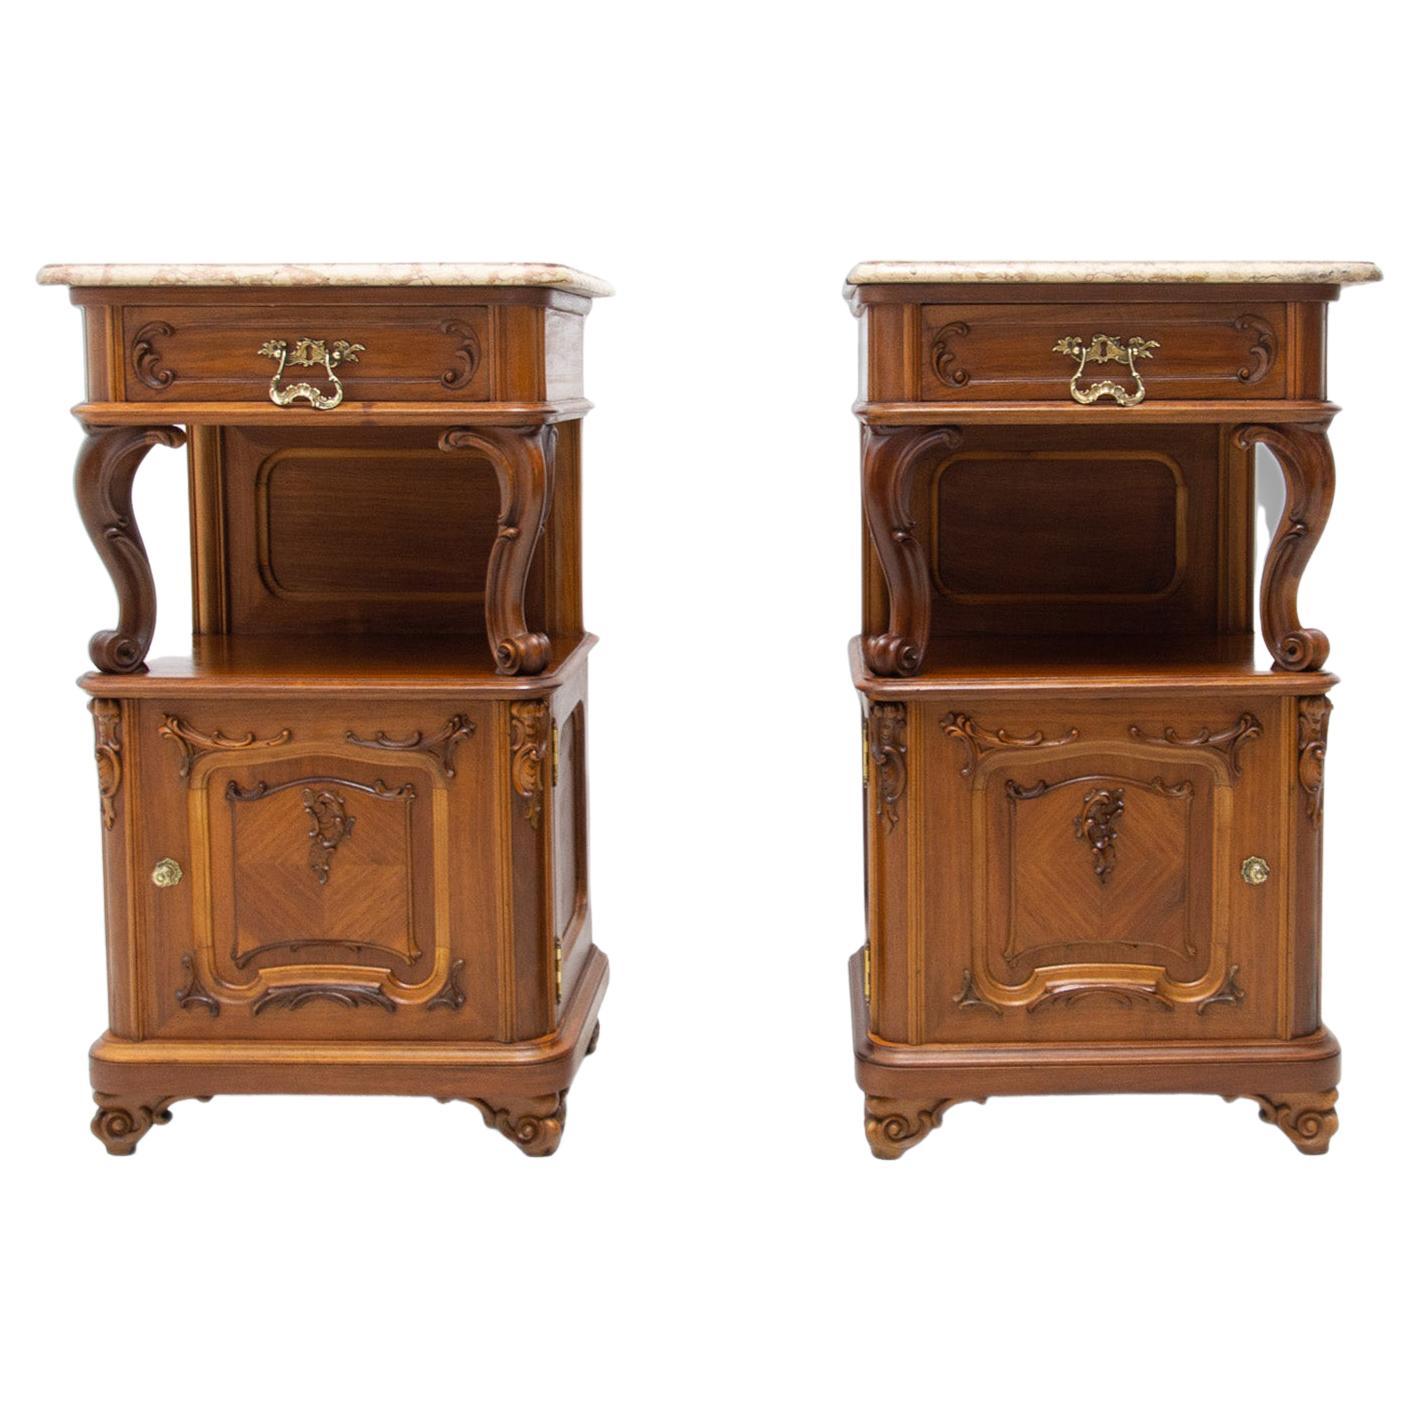 Pair of Fully Restored Historicist Bedside Tables, 1910, Austria